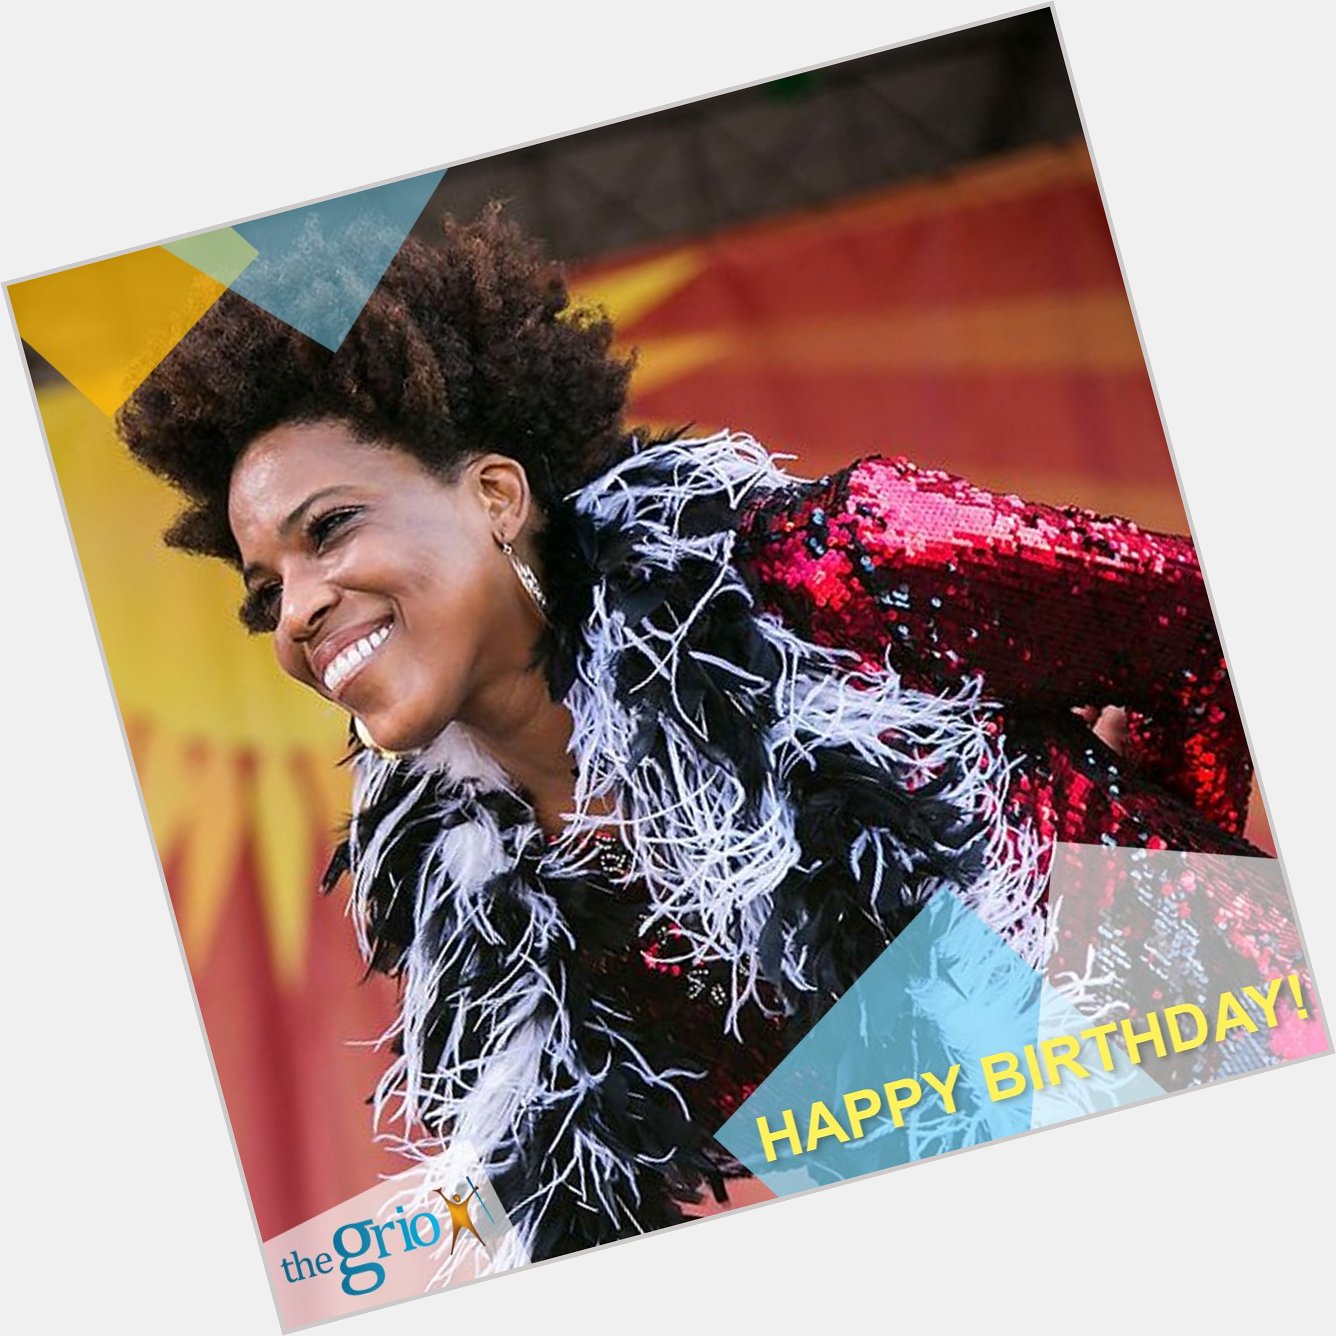 Screaming a Happy Birthday to none other than Macy Gray and Foxy Brown!  